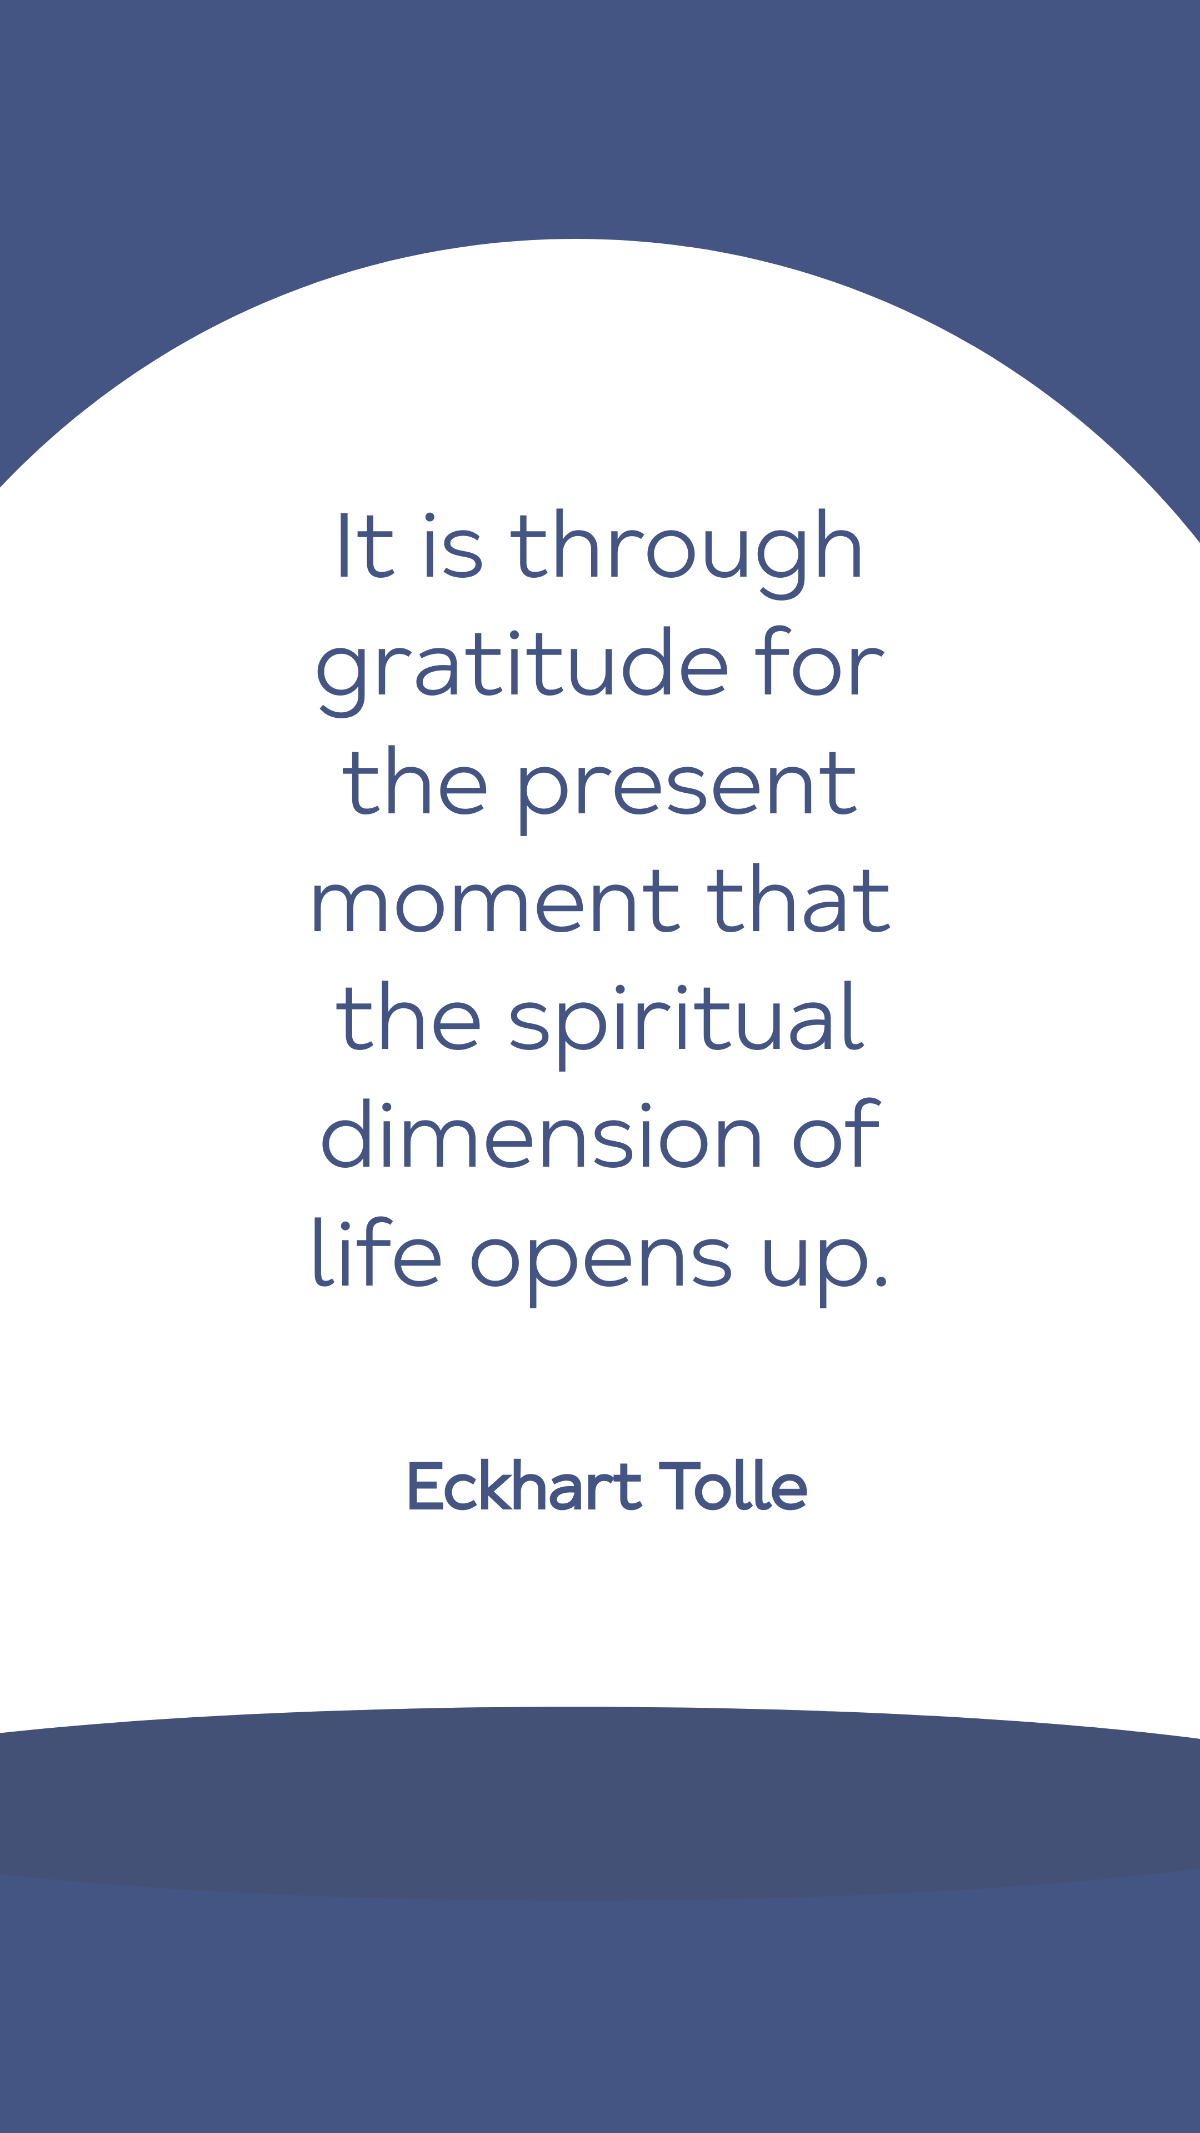 Free Eckhart Tolle -It is through gratitude for the present moment that the spiritual dimension of life opens up. Template